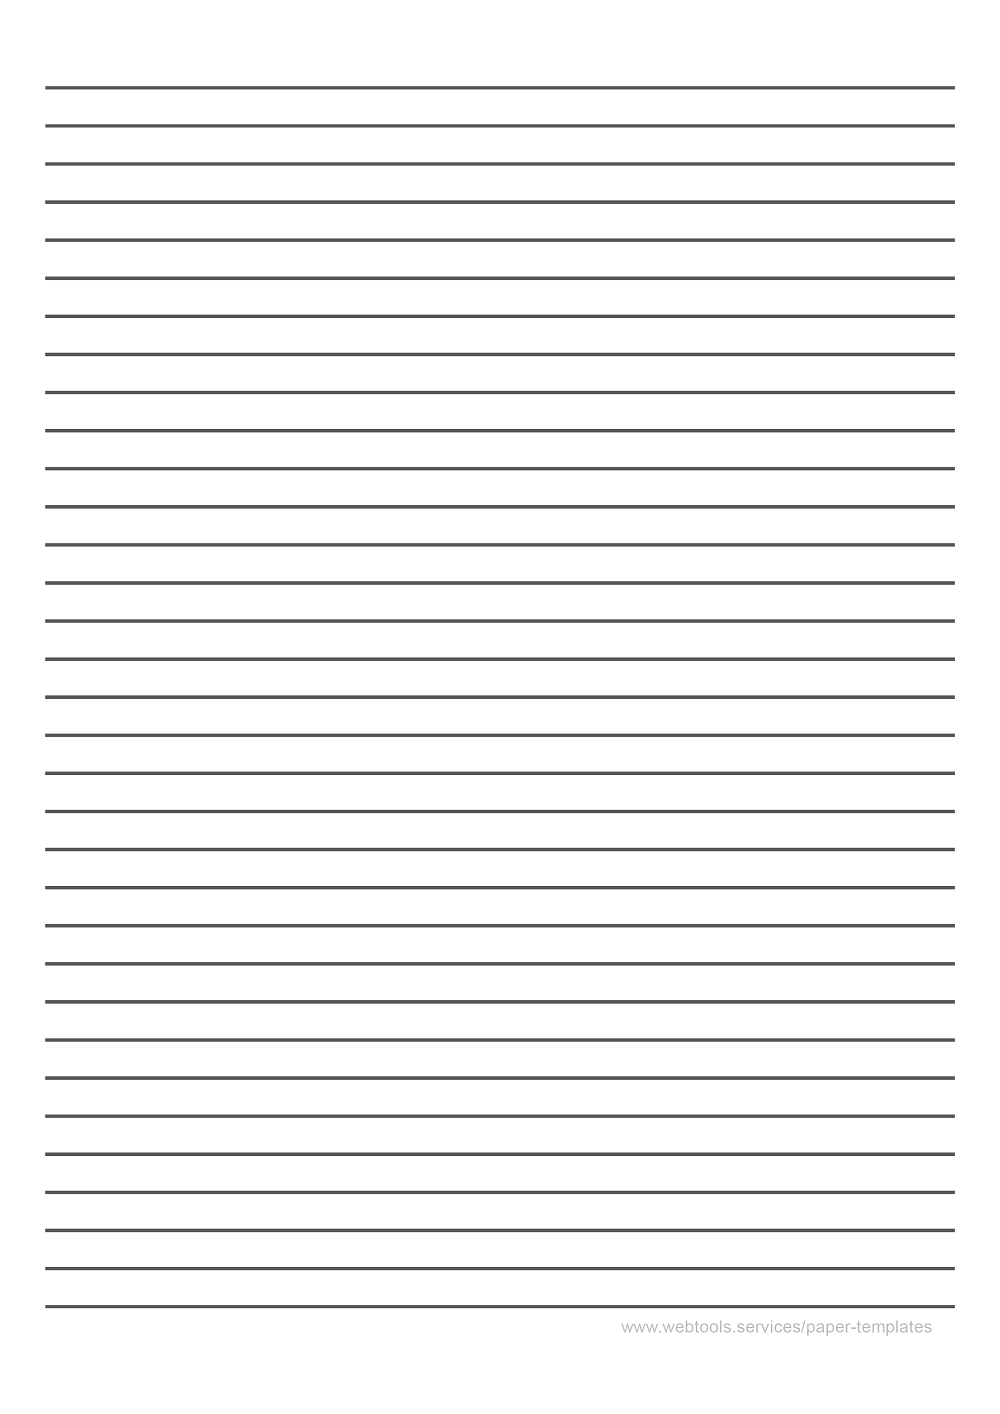 hindi notebook page with black lines